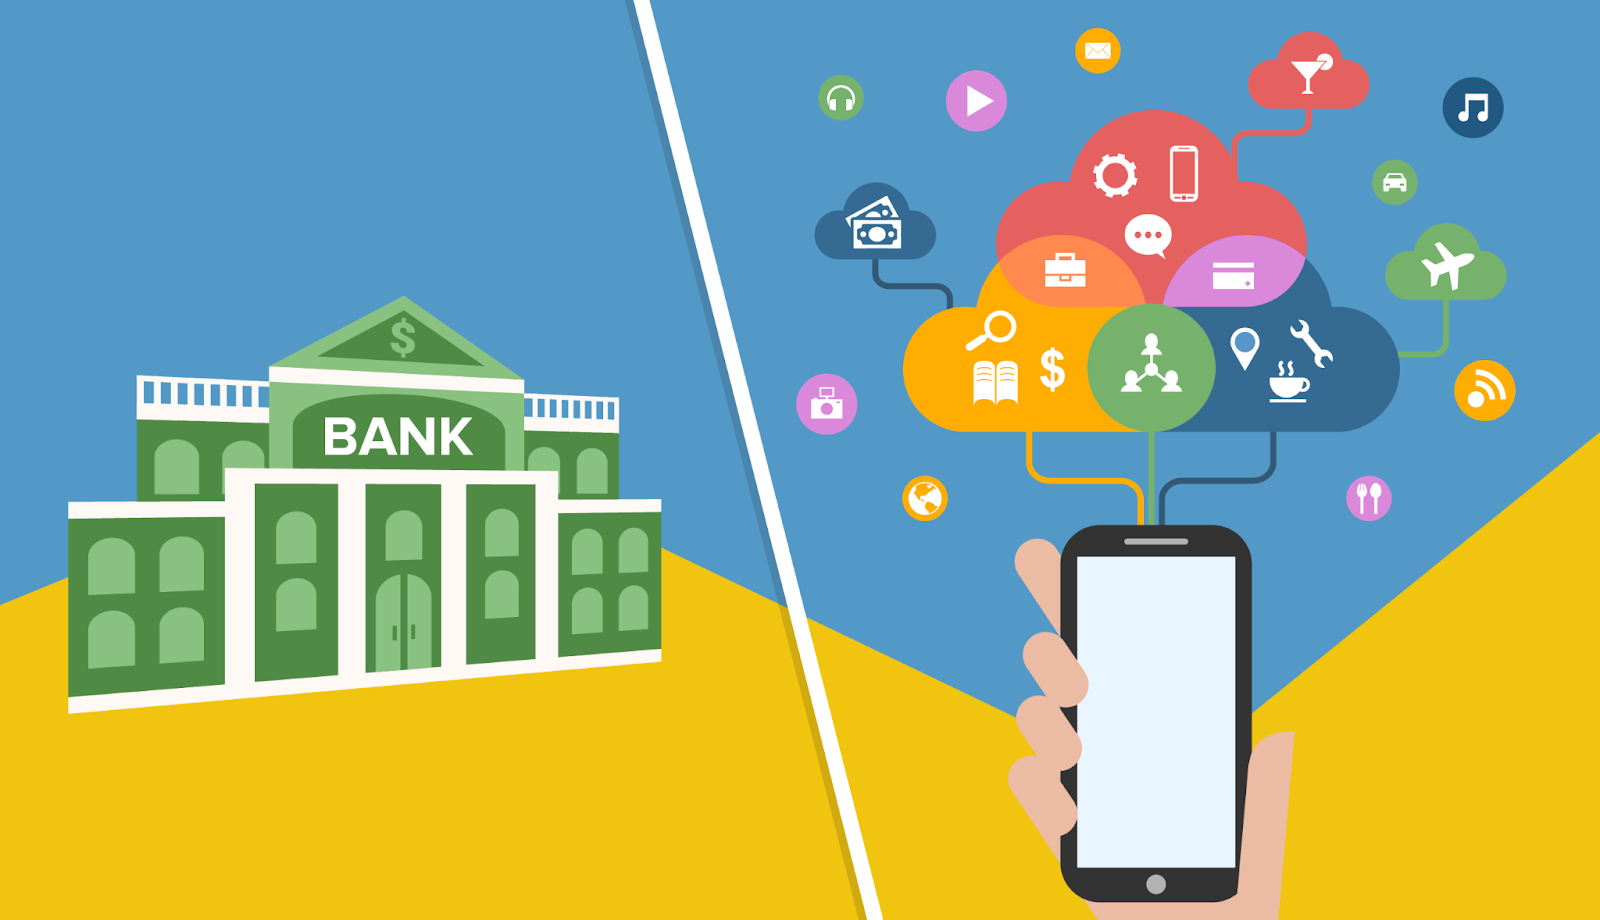 STEPS TO DETERMINE YOUR ORGANIZATION NEED A NEW BANKING PLATFORM